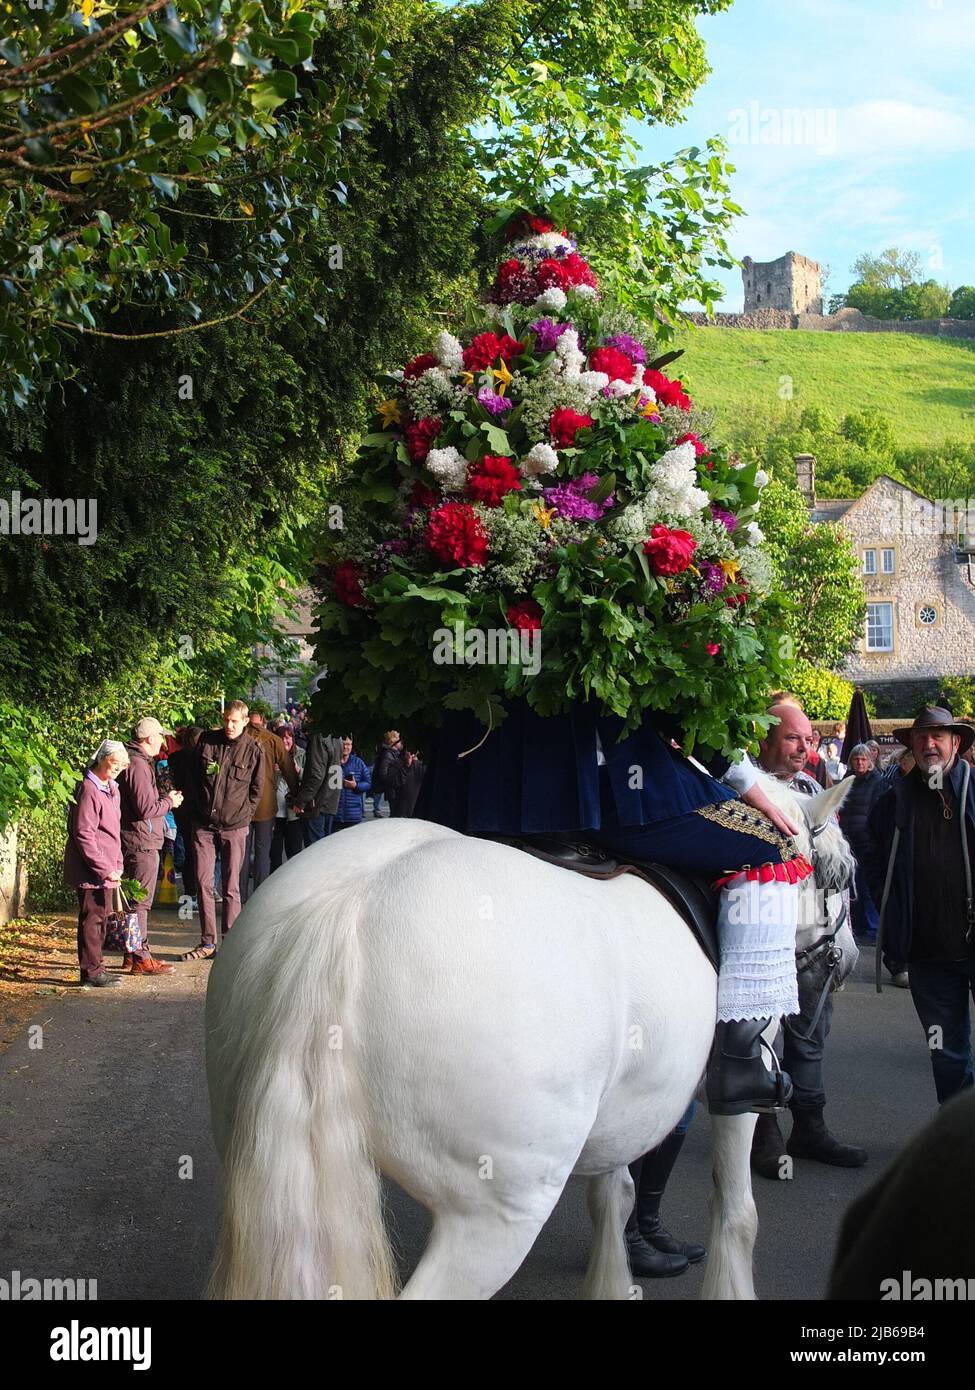 The Castleton Garland King wearing a hooped garland of flowers rides on horseback at ancient Castleton Garland Ceremony 2022 with Peveril Castle in bg Stock Photo